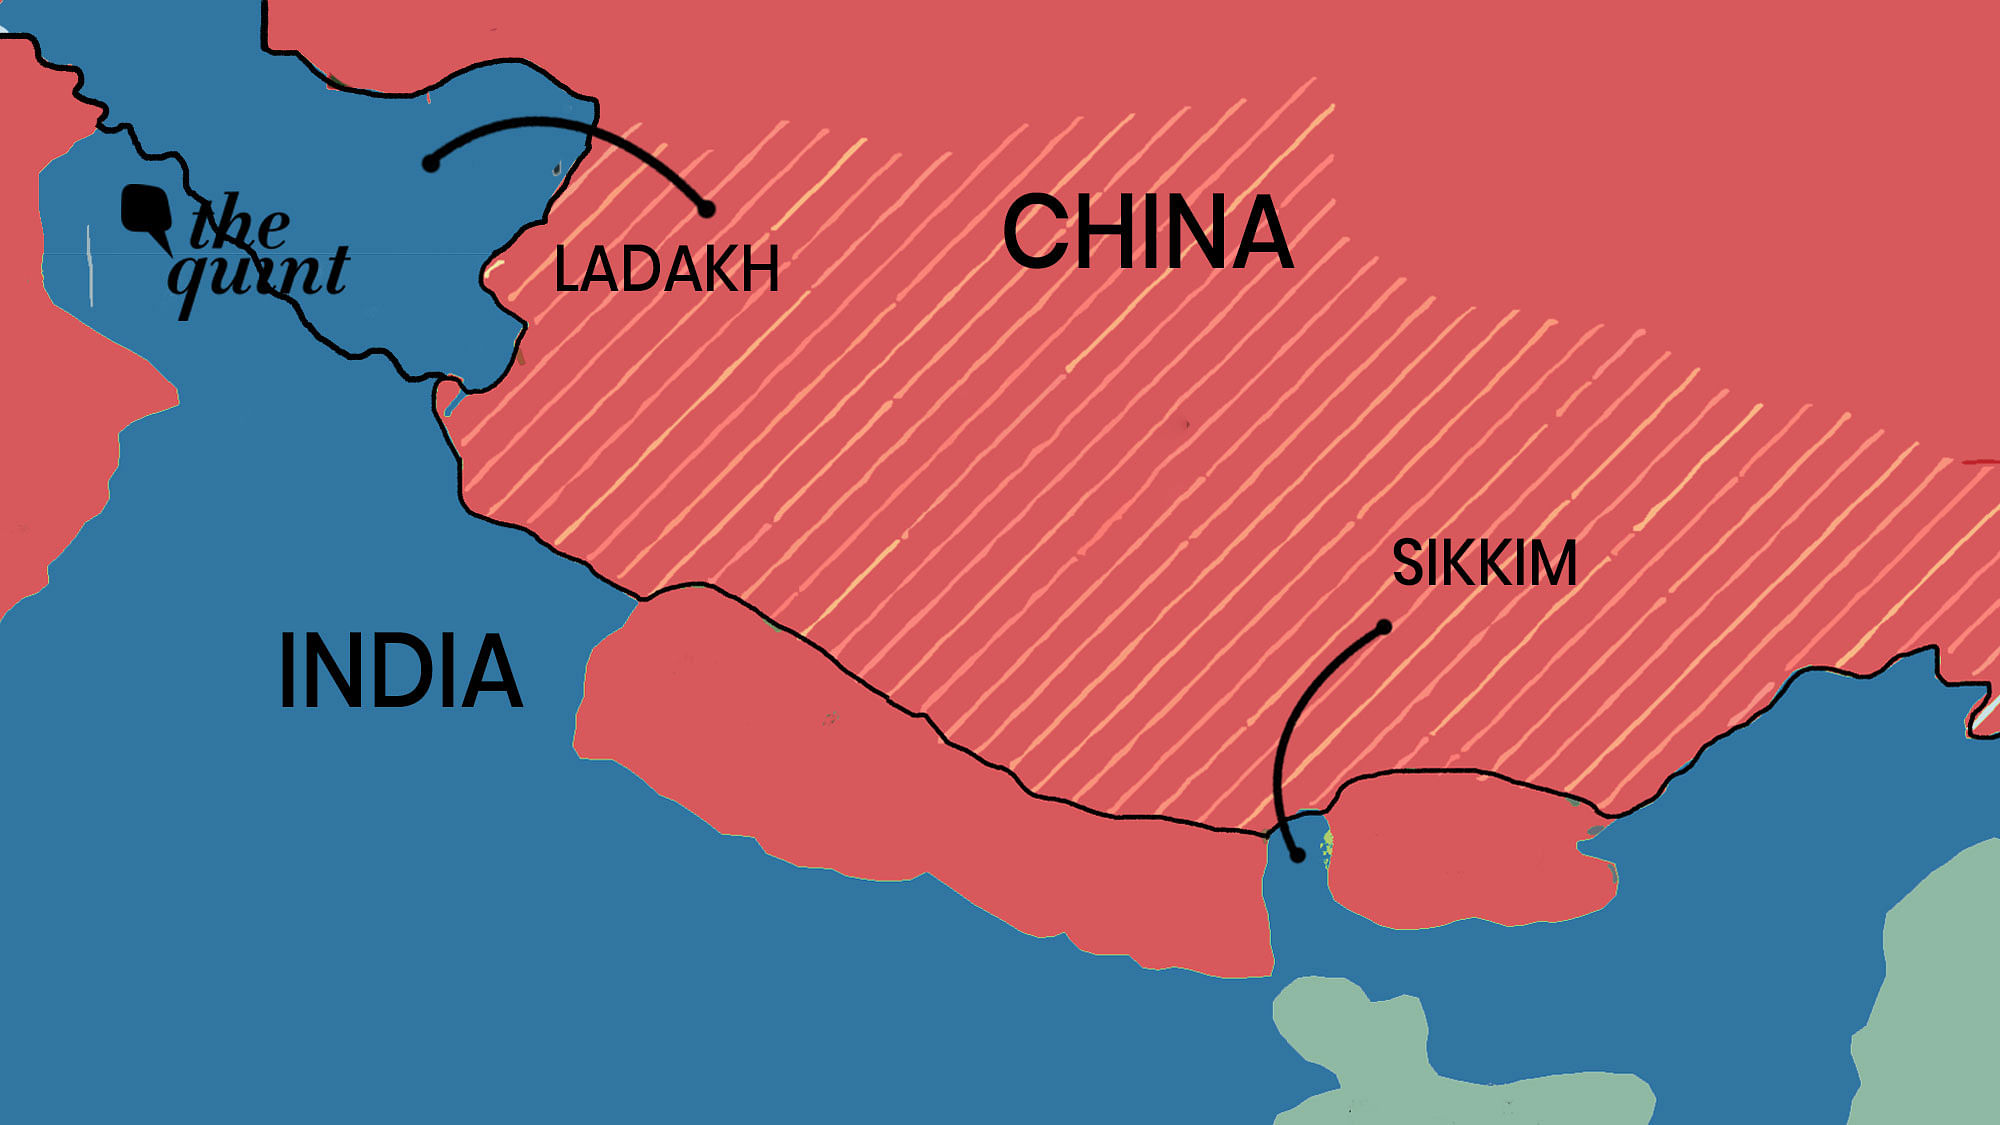 Tensions between the Indian and Chinese forces along the Line of Actual Control (LAC) in eastern Ladakh continue to remain high.